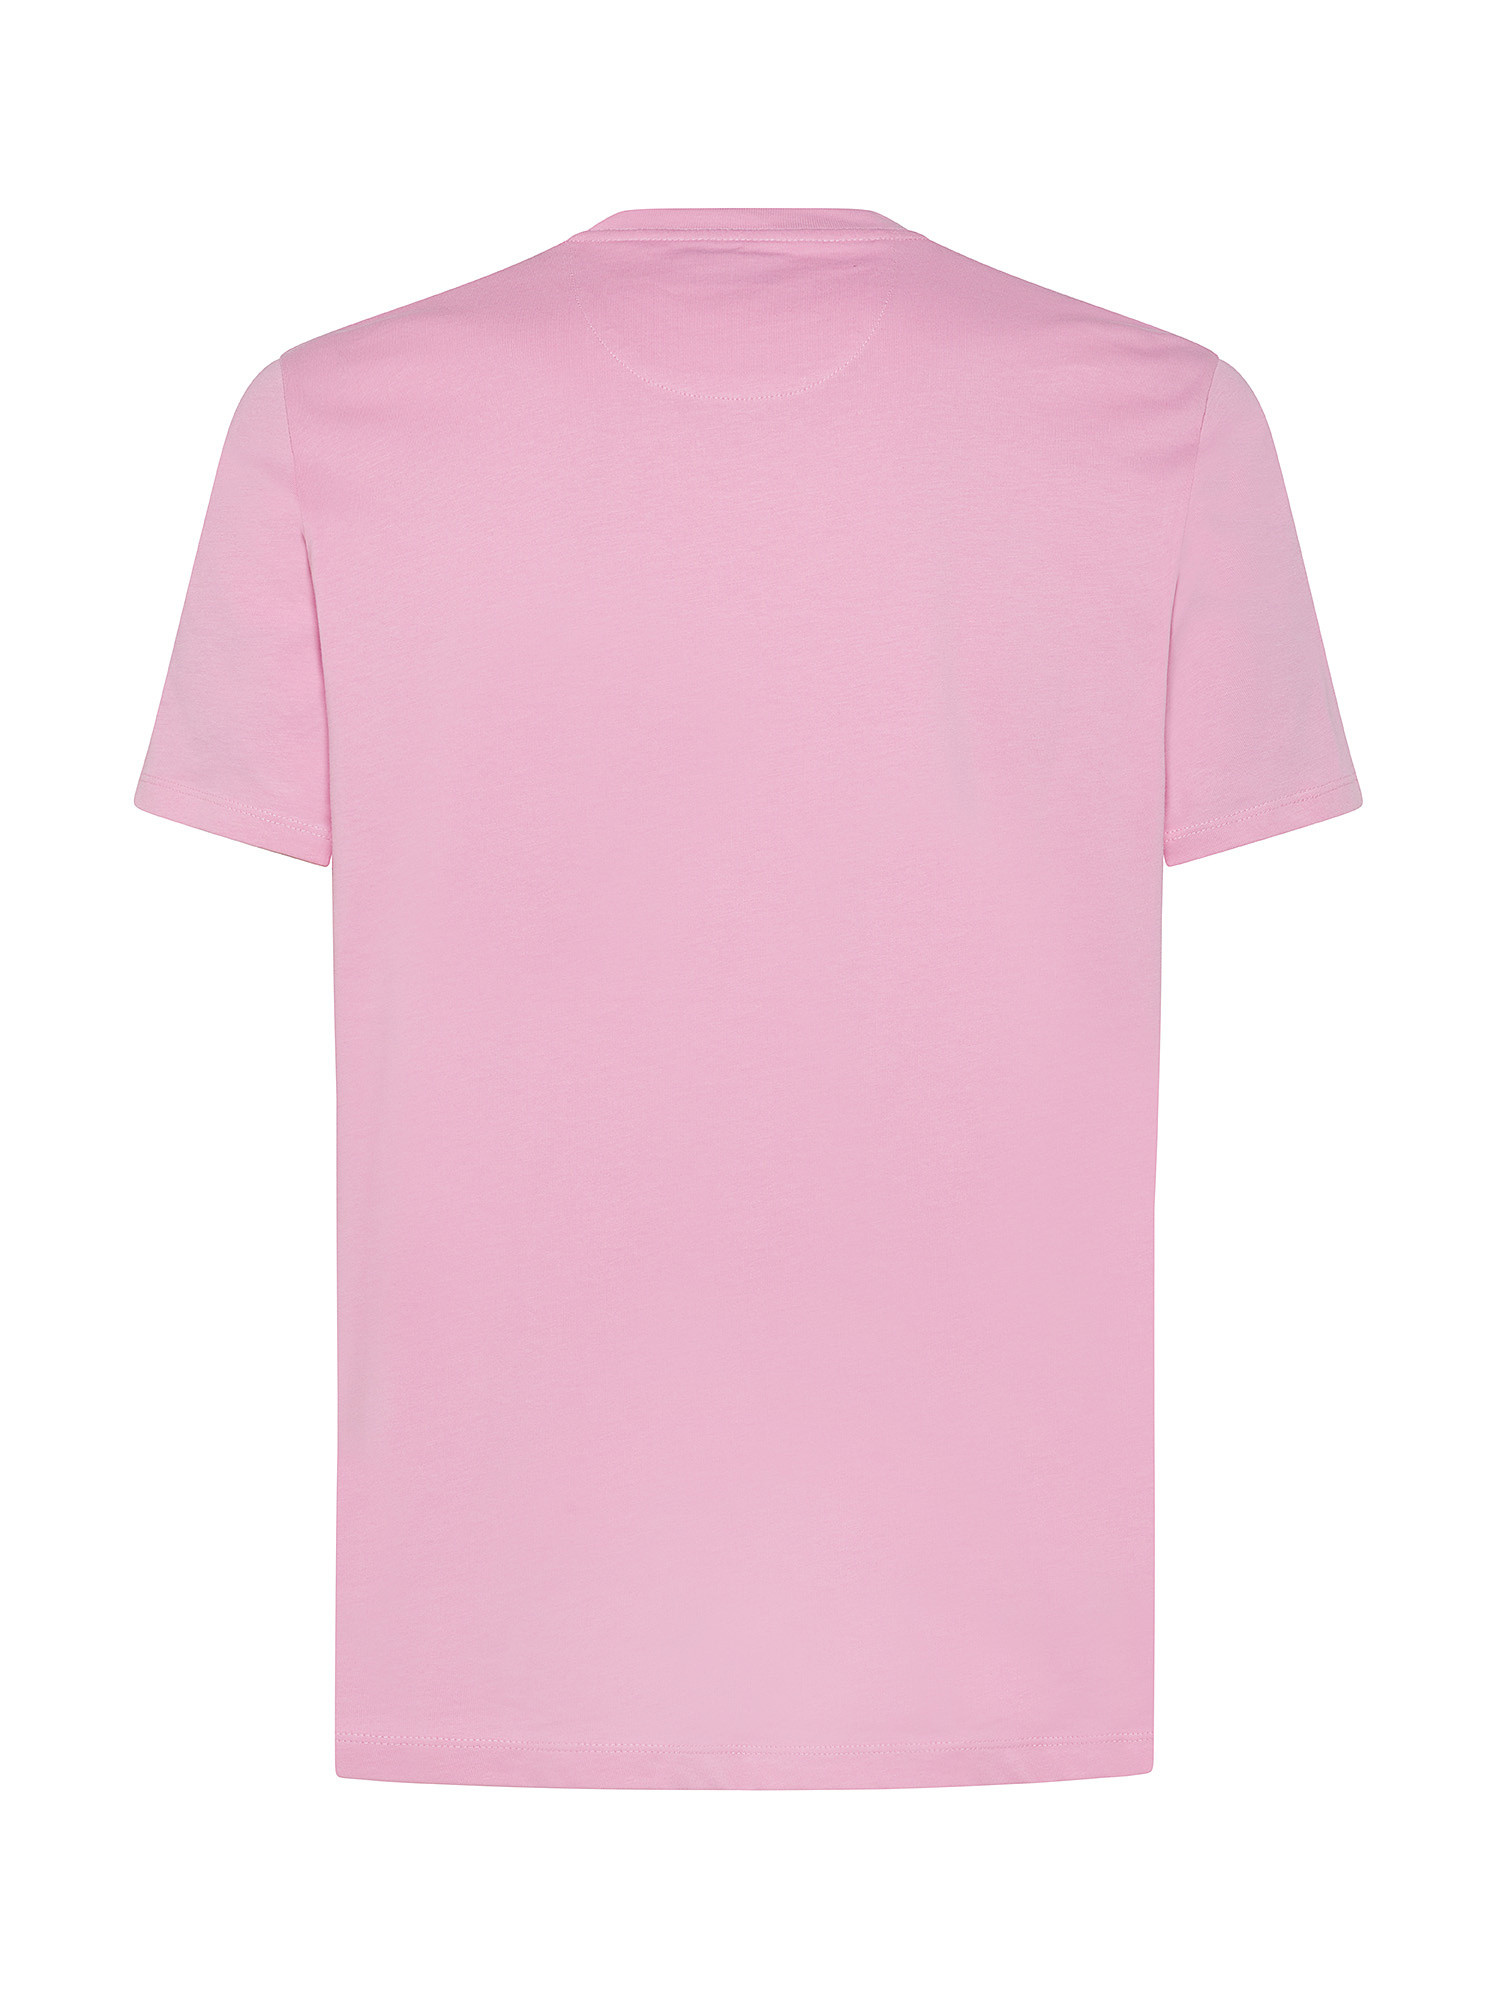 JCT - T-shirt in puro cotone supima, Rosa, large image number 1